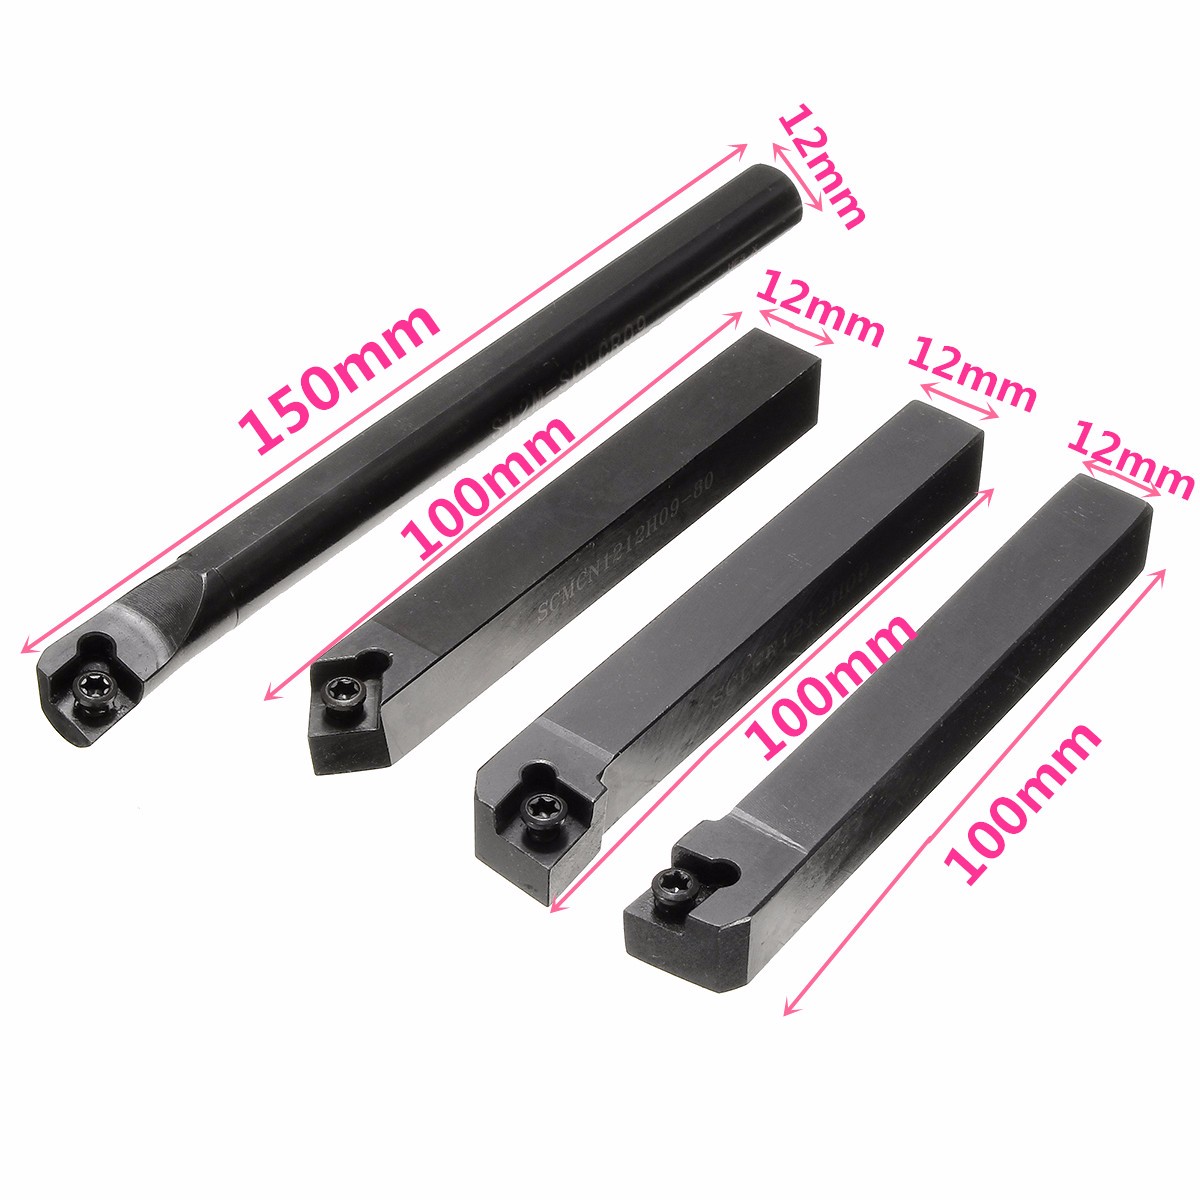 4pcs-12mm-Shank-External-Turning-Tool-with-CCMT09T304-Carbide-Inserts-CNC-Machine-Tools-Turning-1615867-10